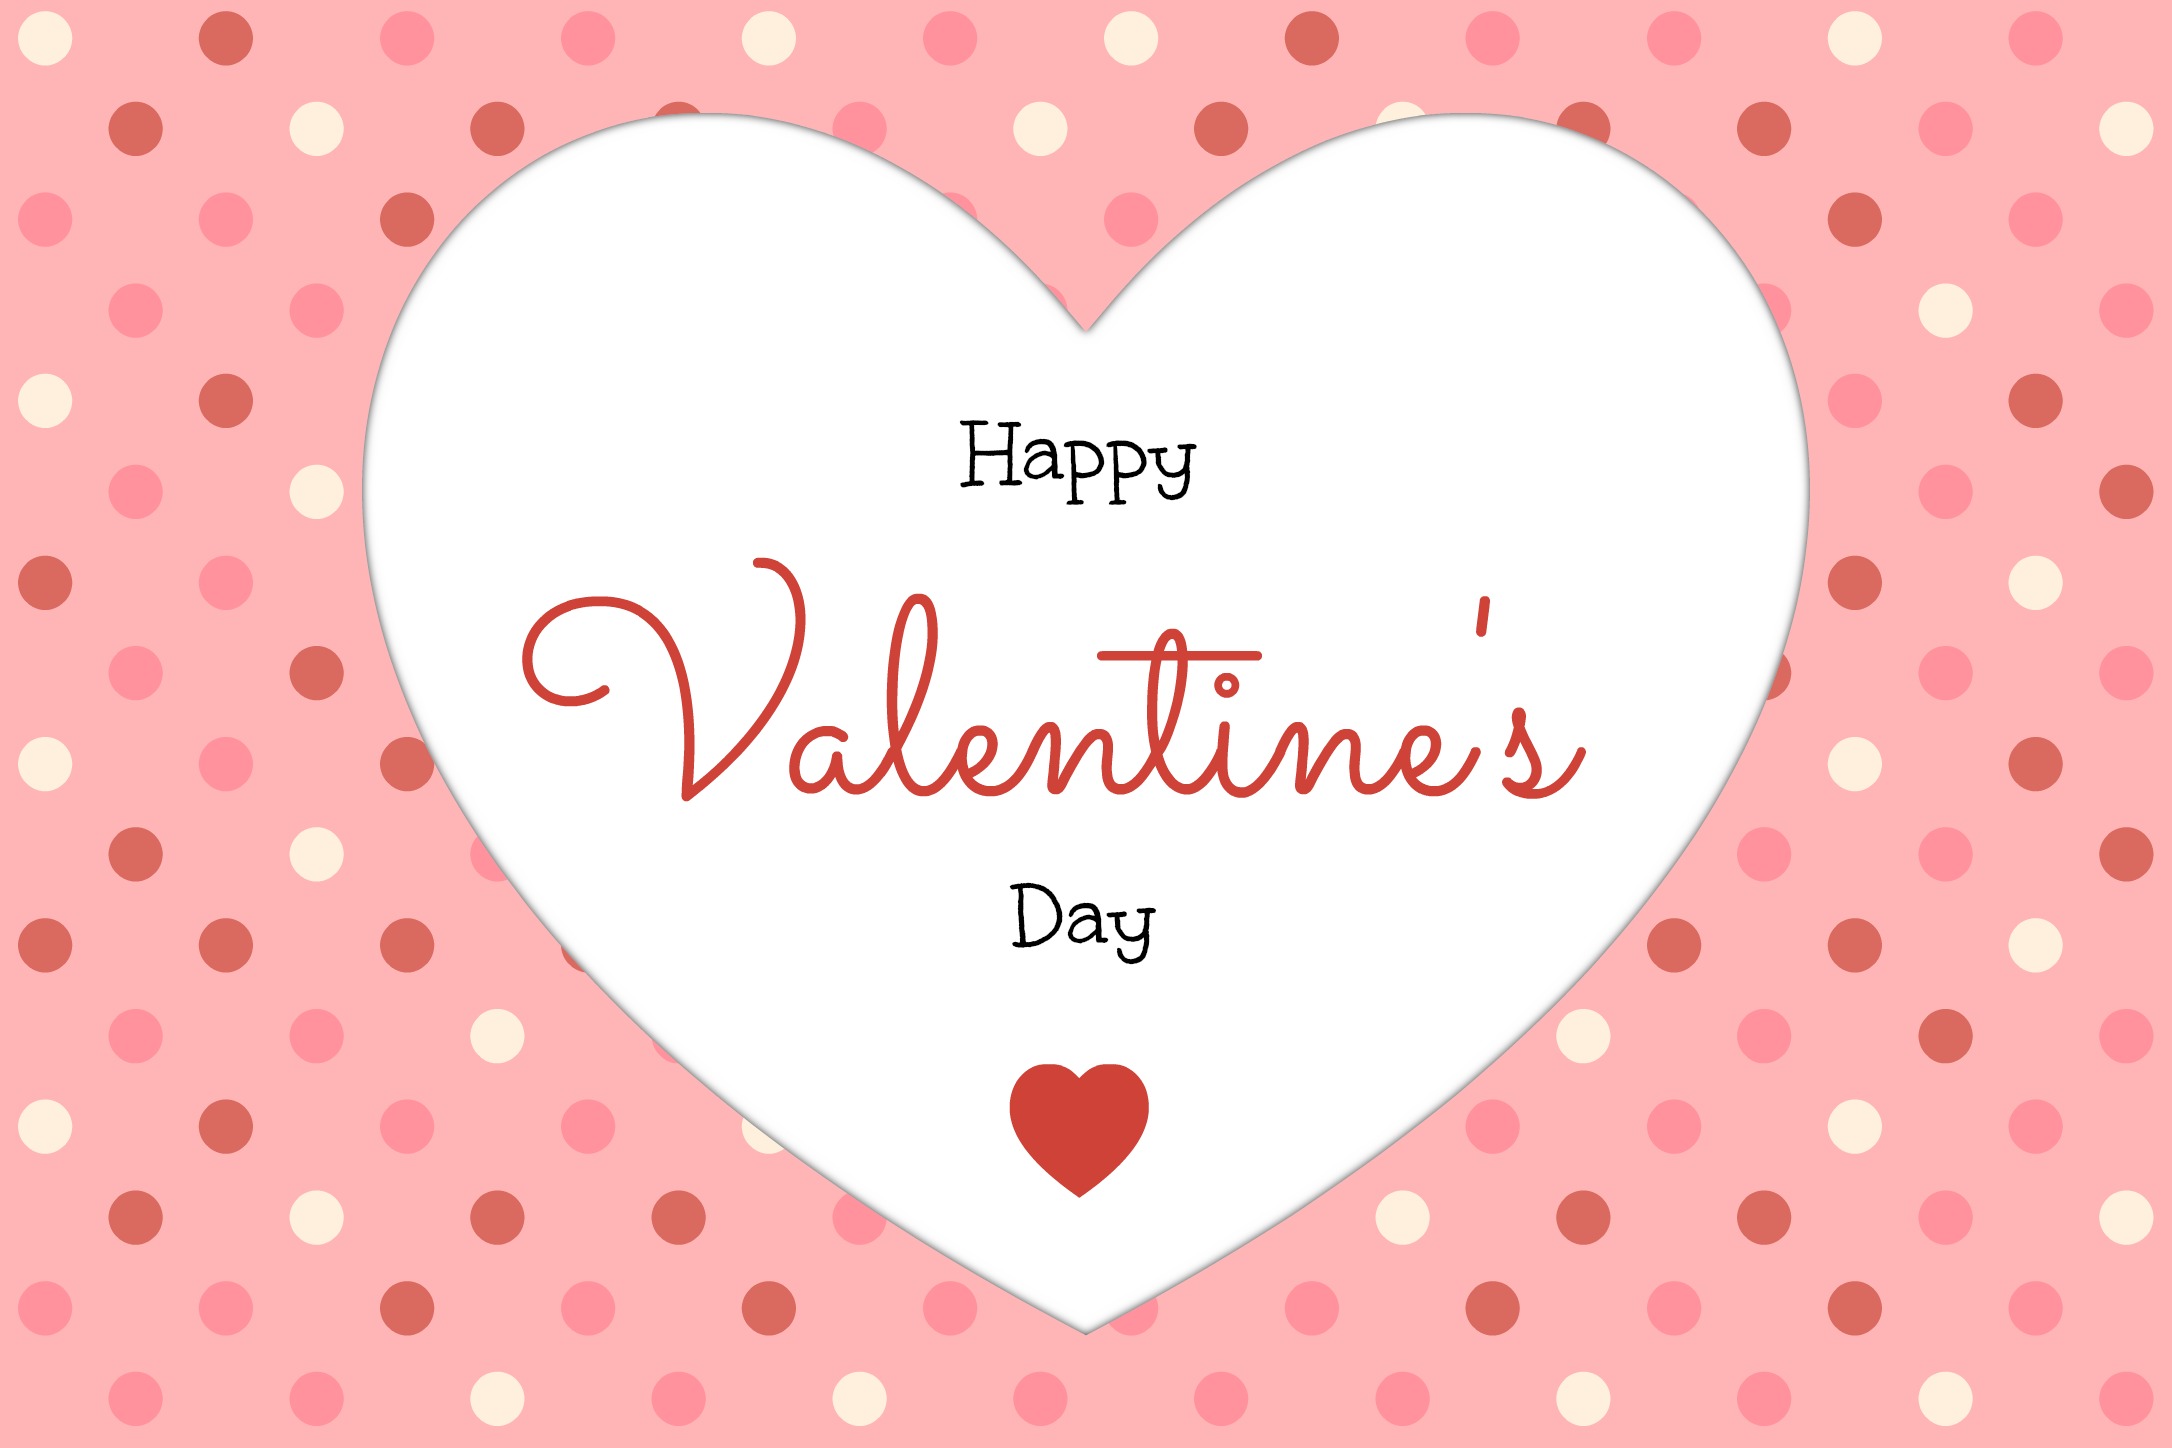 Happy Valentines Day Cards Google Image